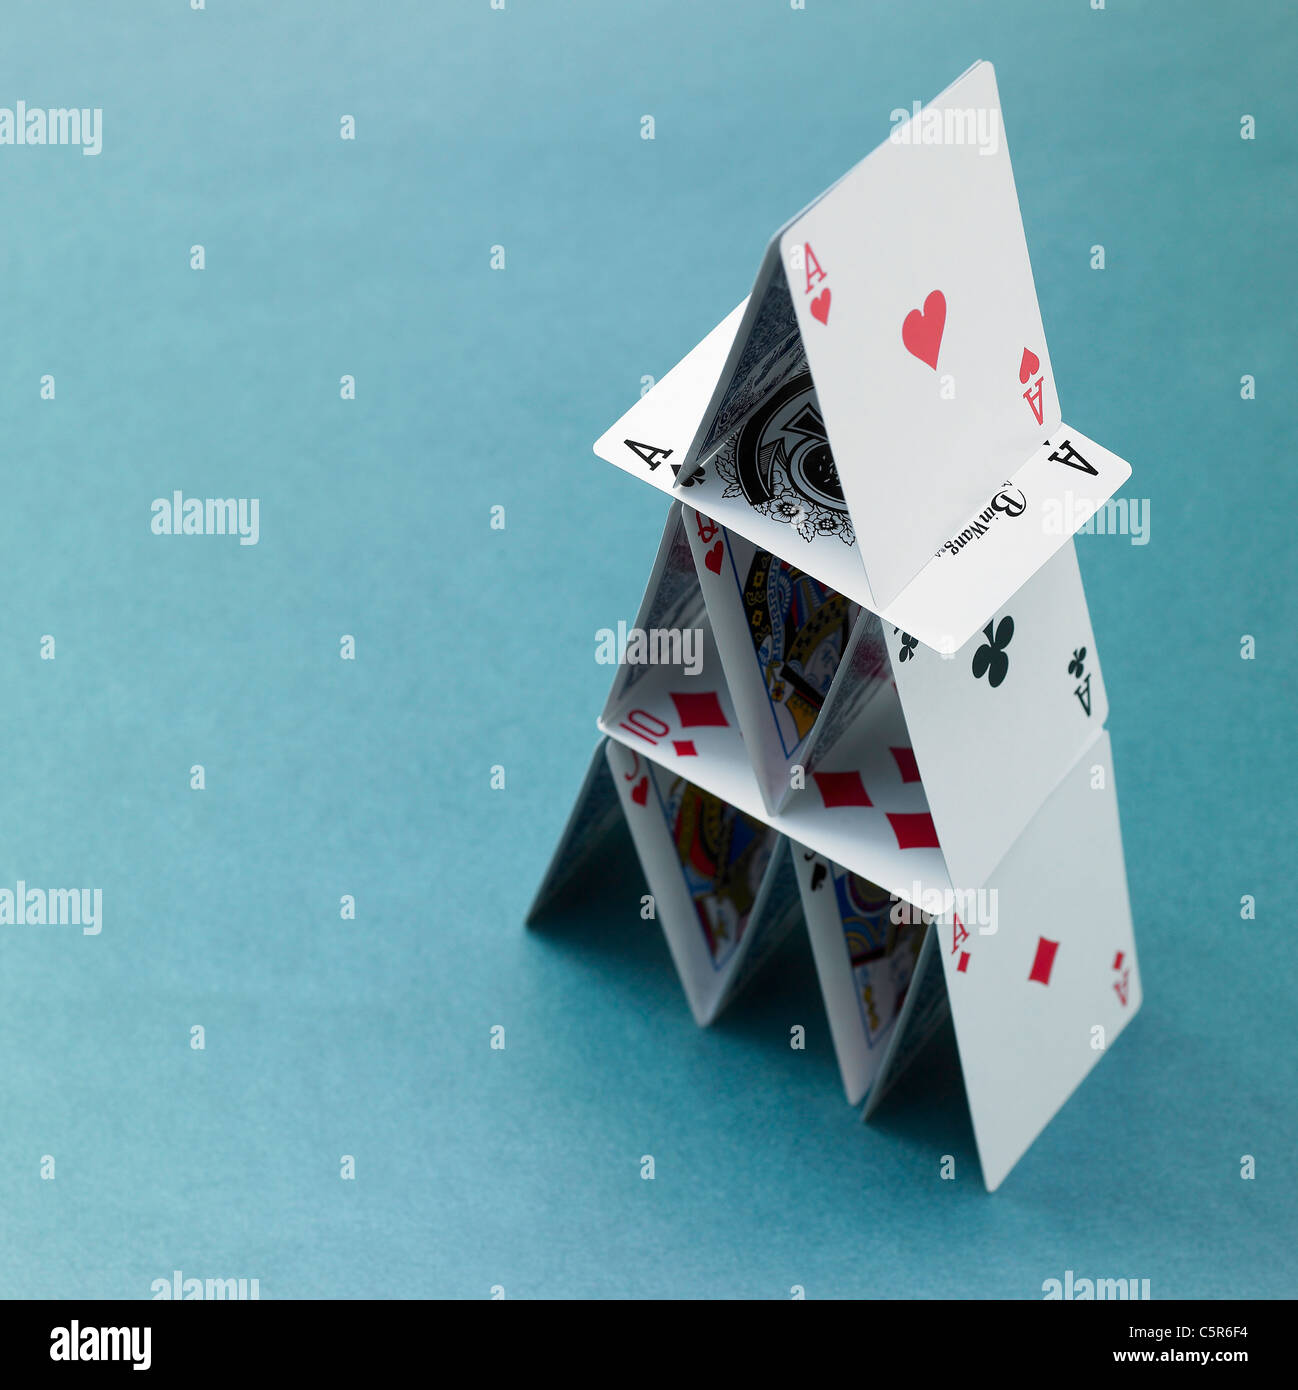 Pyramid made of playing cards Stock Photo